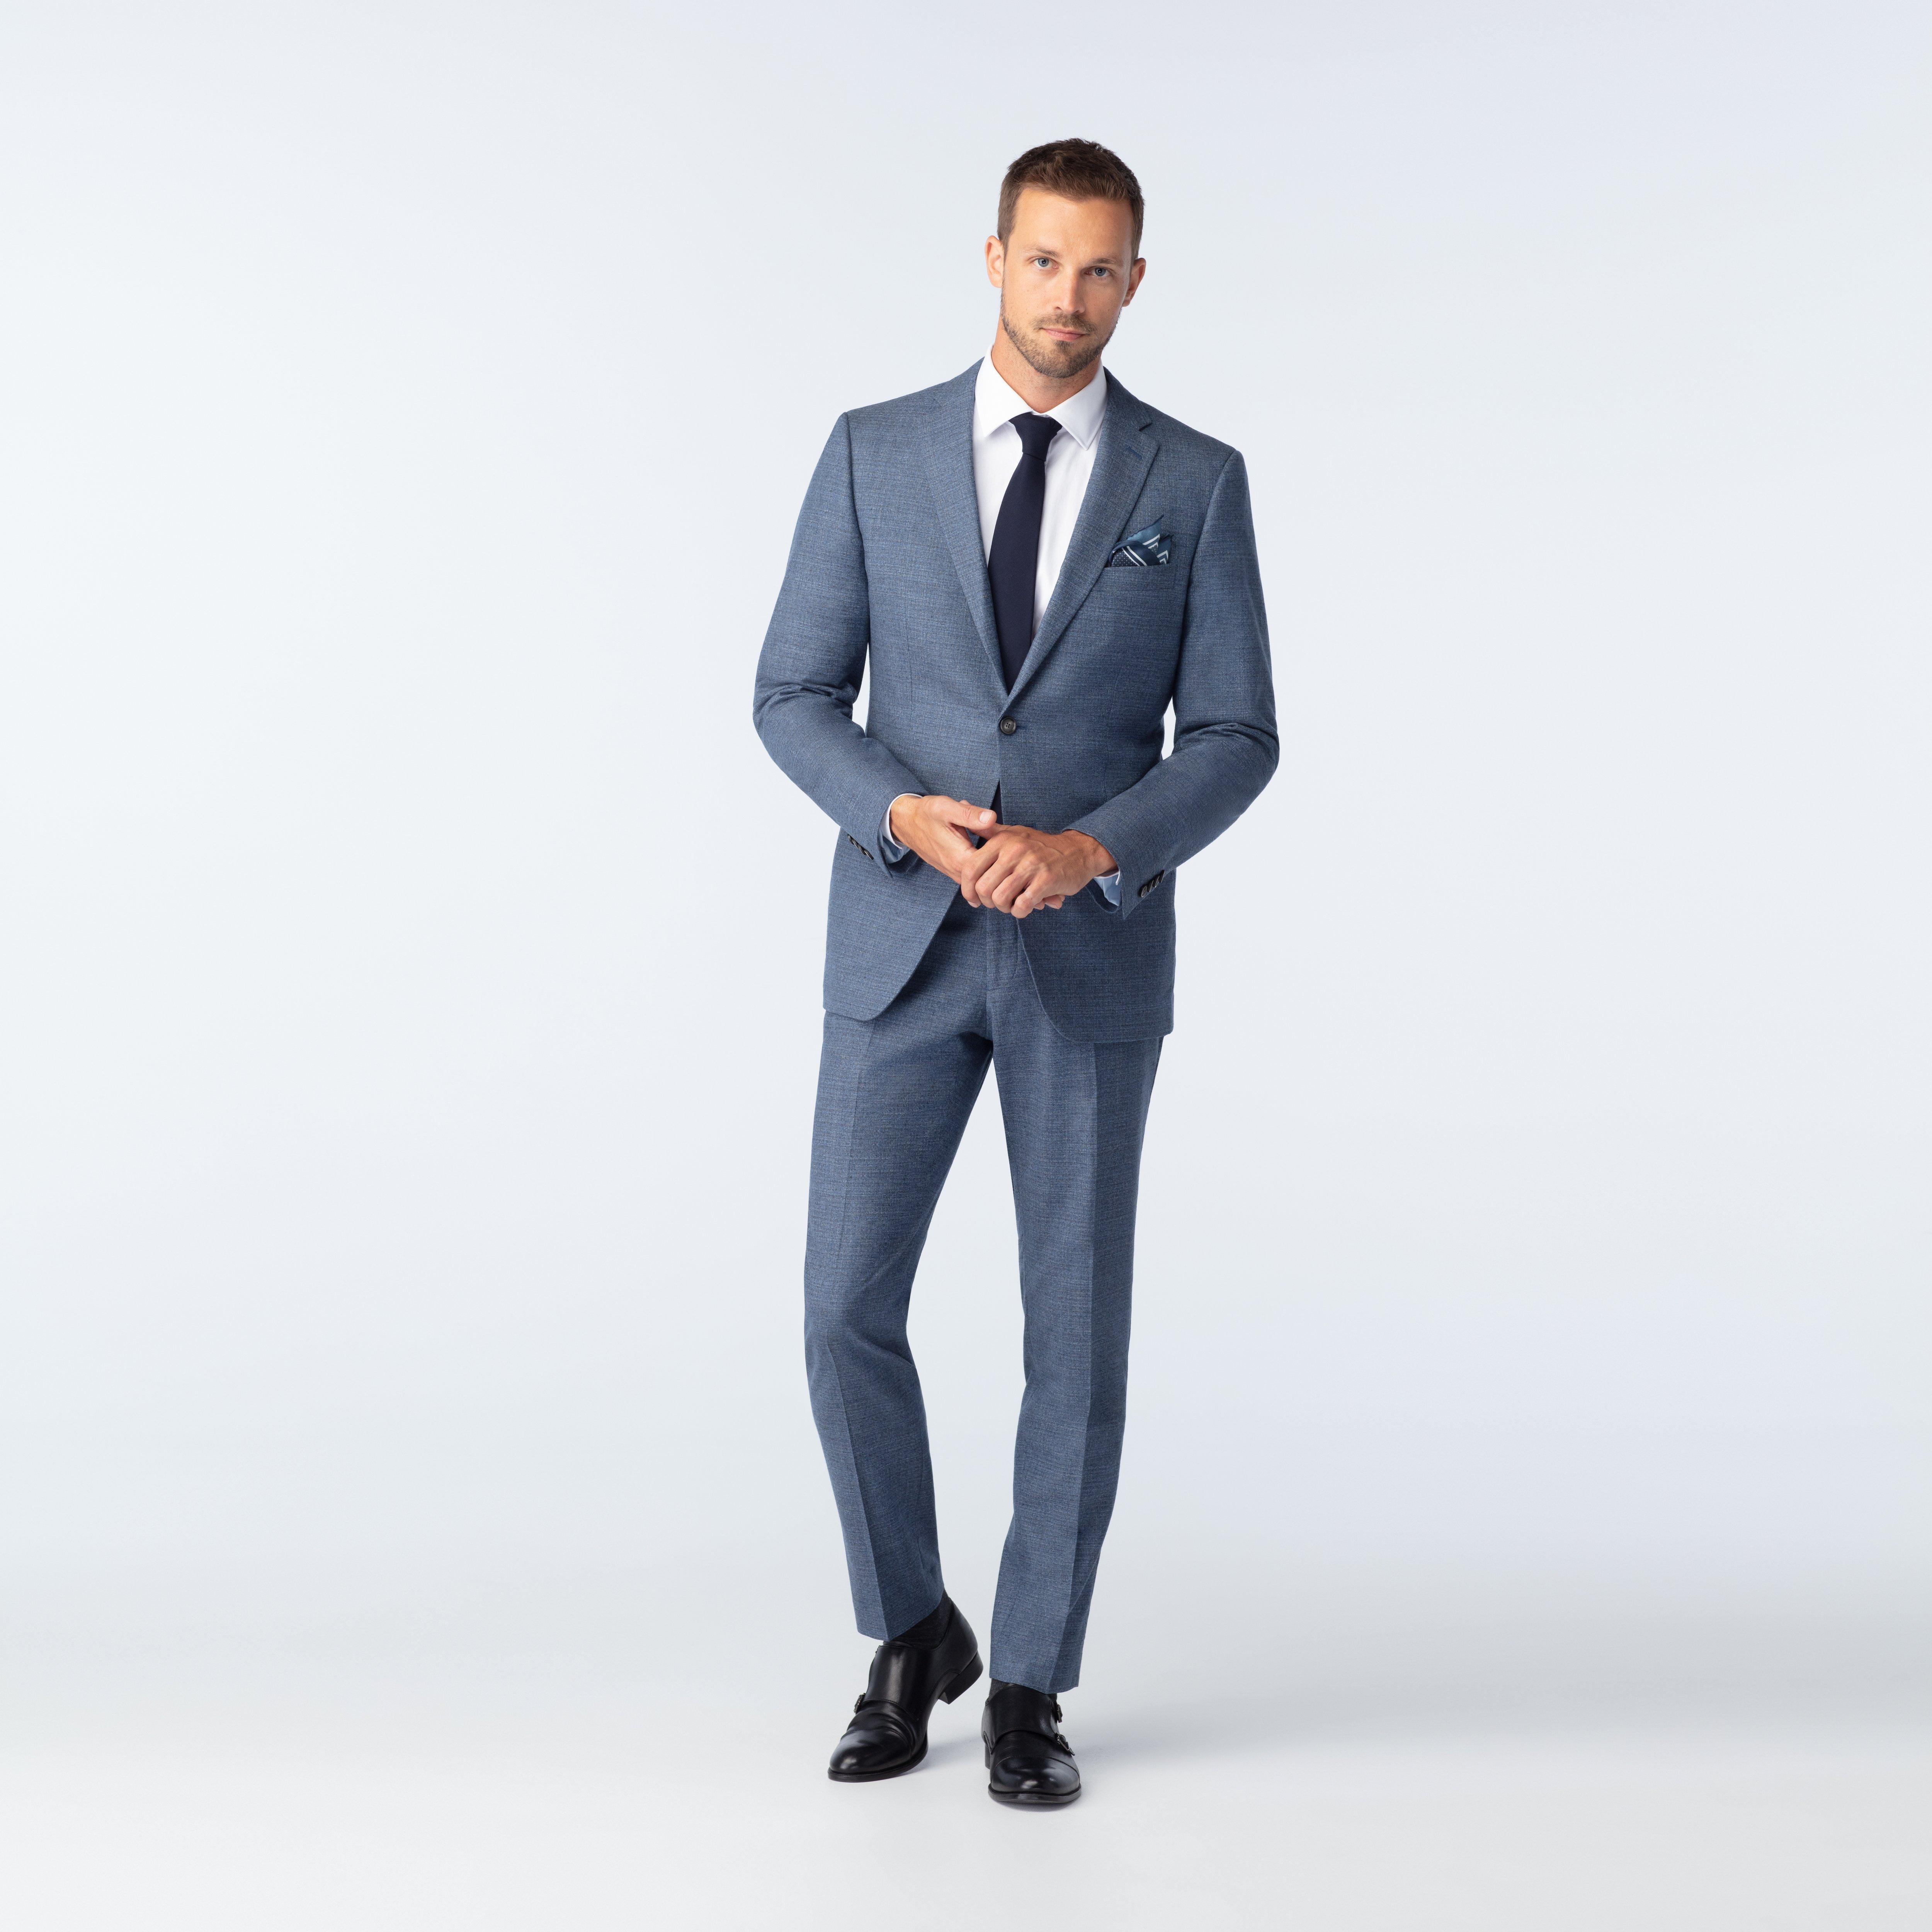 Custom Suits Made For You - Monza Royal Flannel Stone Blue Suit | INDOCHINO